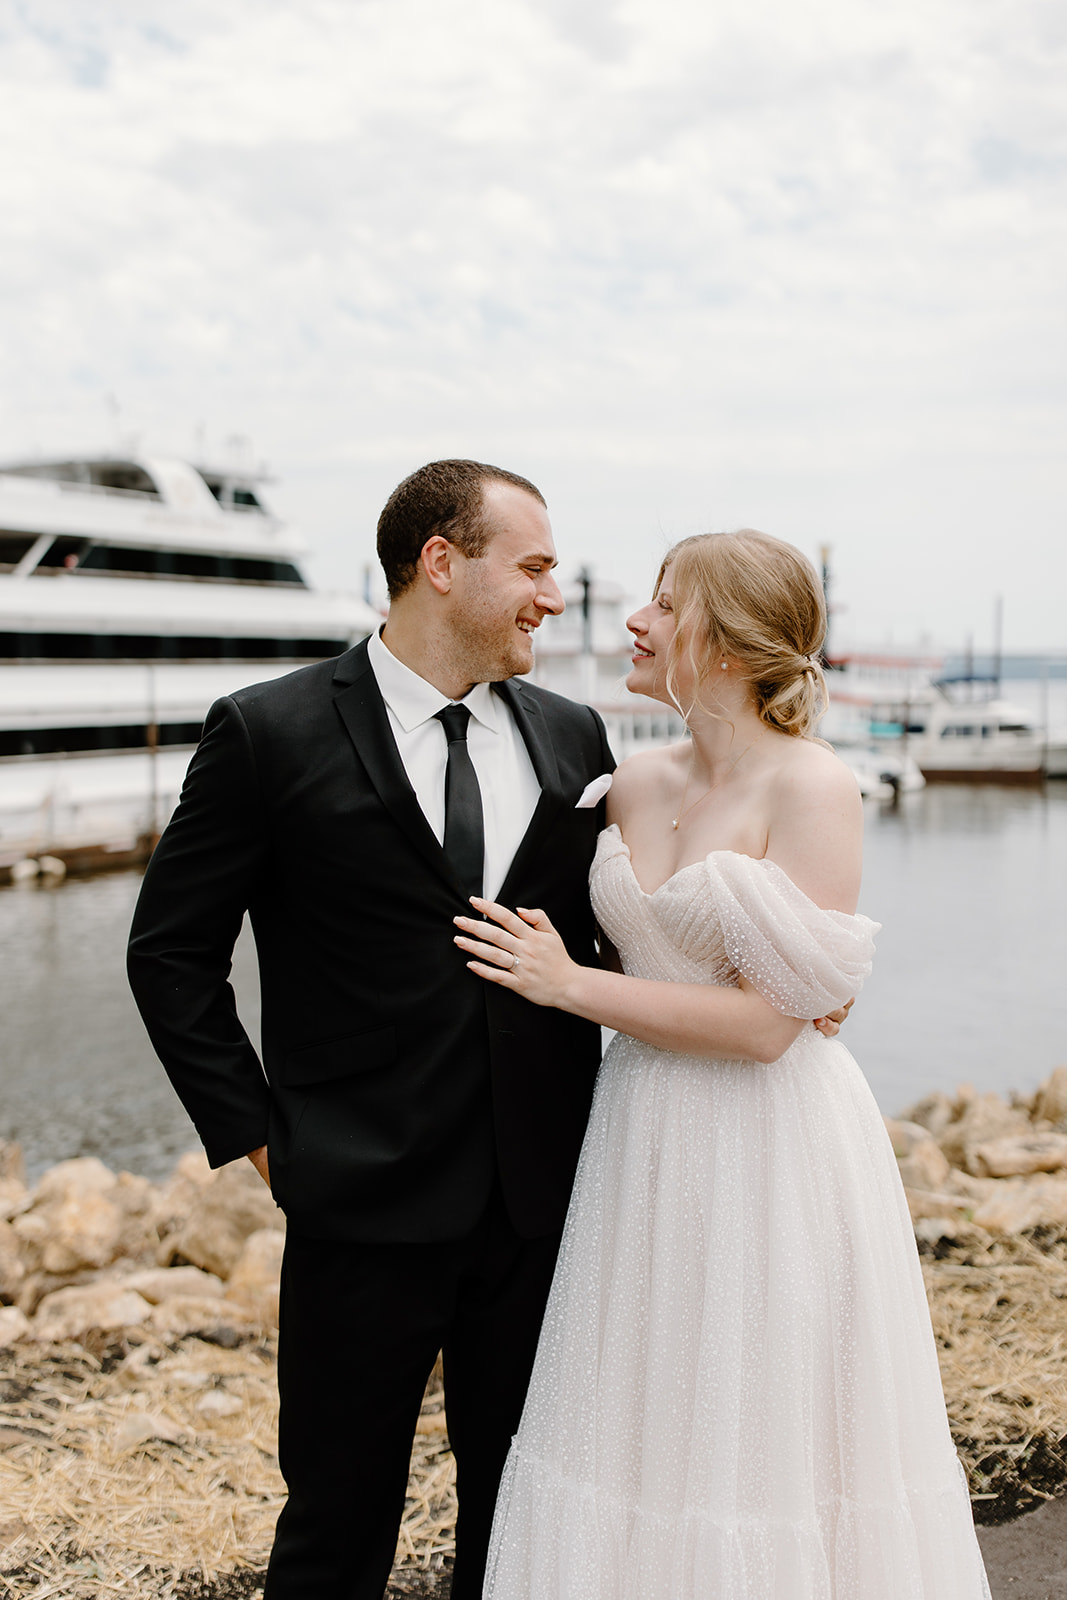 Bride and groom smile at each other in front of a yacht